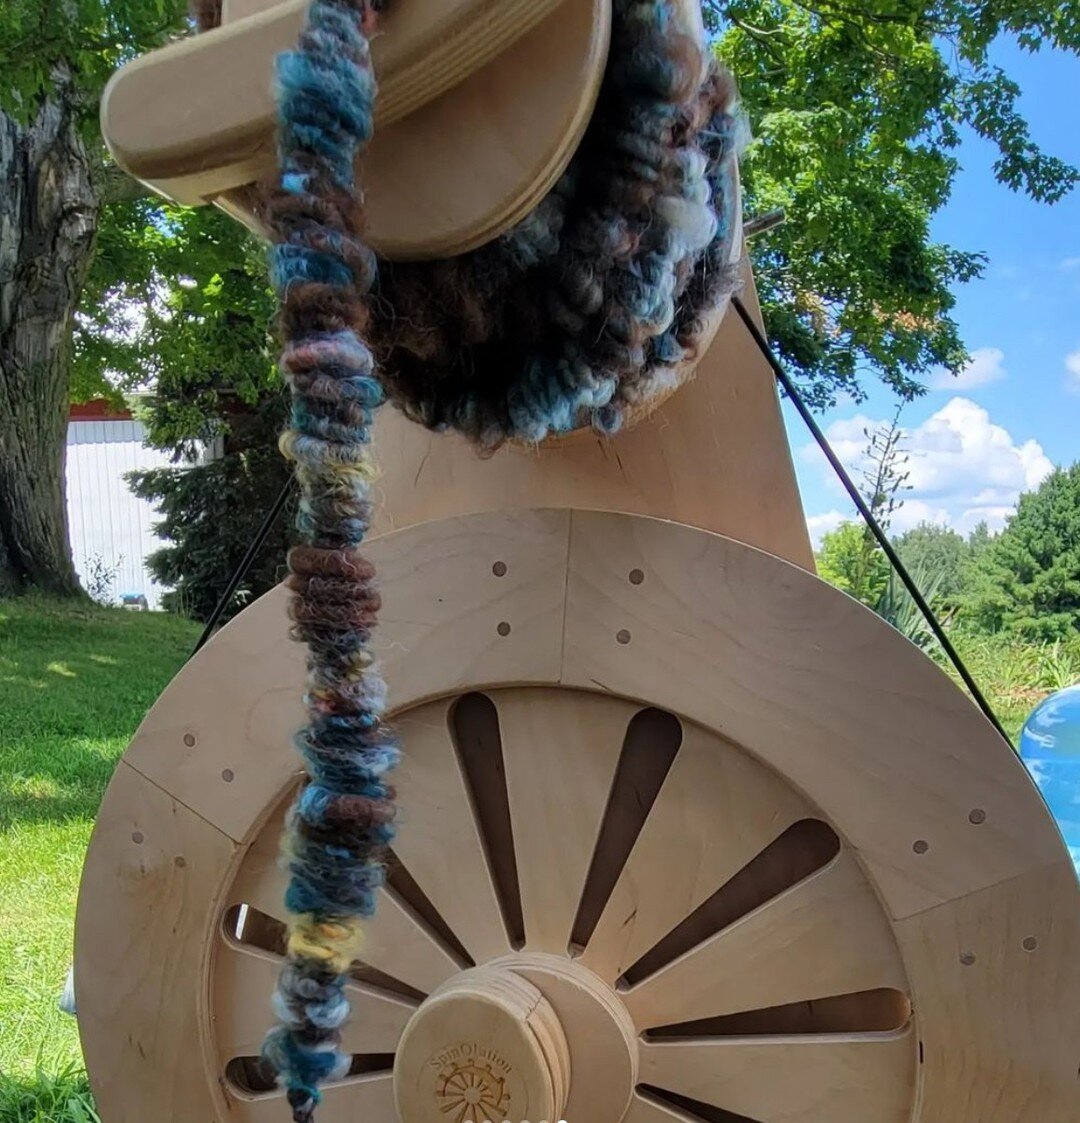 We think @hensnchicksfiberarts has the right idea for sure! Thanks for sharing. ⁣
⁣
@hensnchicksfiberarts⁣
Spinning art yarn is very therapeutic for me 🧶⁣
⁣
No rules⁣
Just you and the wool⁣
So freeing!#spinnersofinstagram ⁣
#spinningyarn ⁣
#knitting